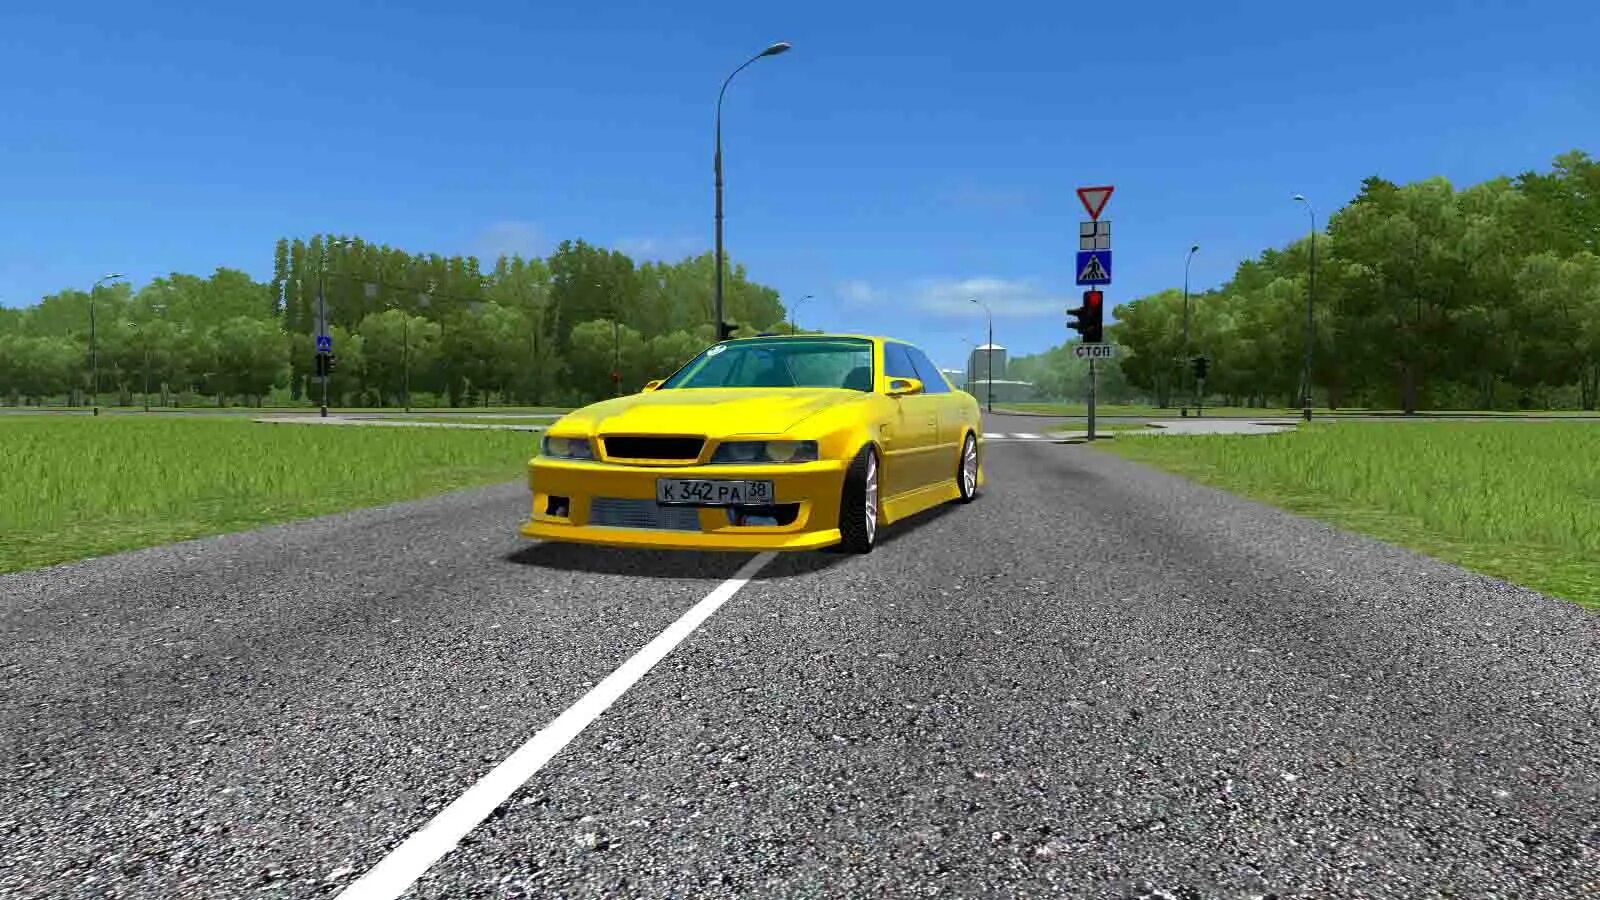 Toyota Chaser City car Driving. Toyota Chaser 100 для City car Driving. Toyota Chaser BEAMNG Drive. Toyota Chaser jzx100 City car Driving Heisenberg.